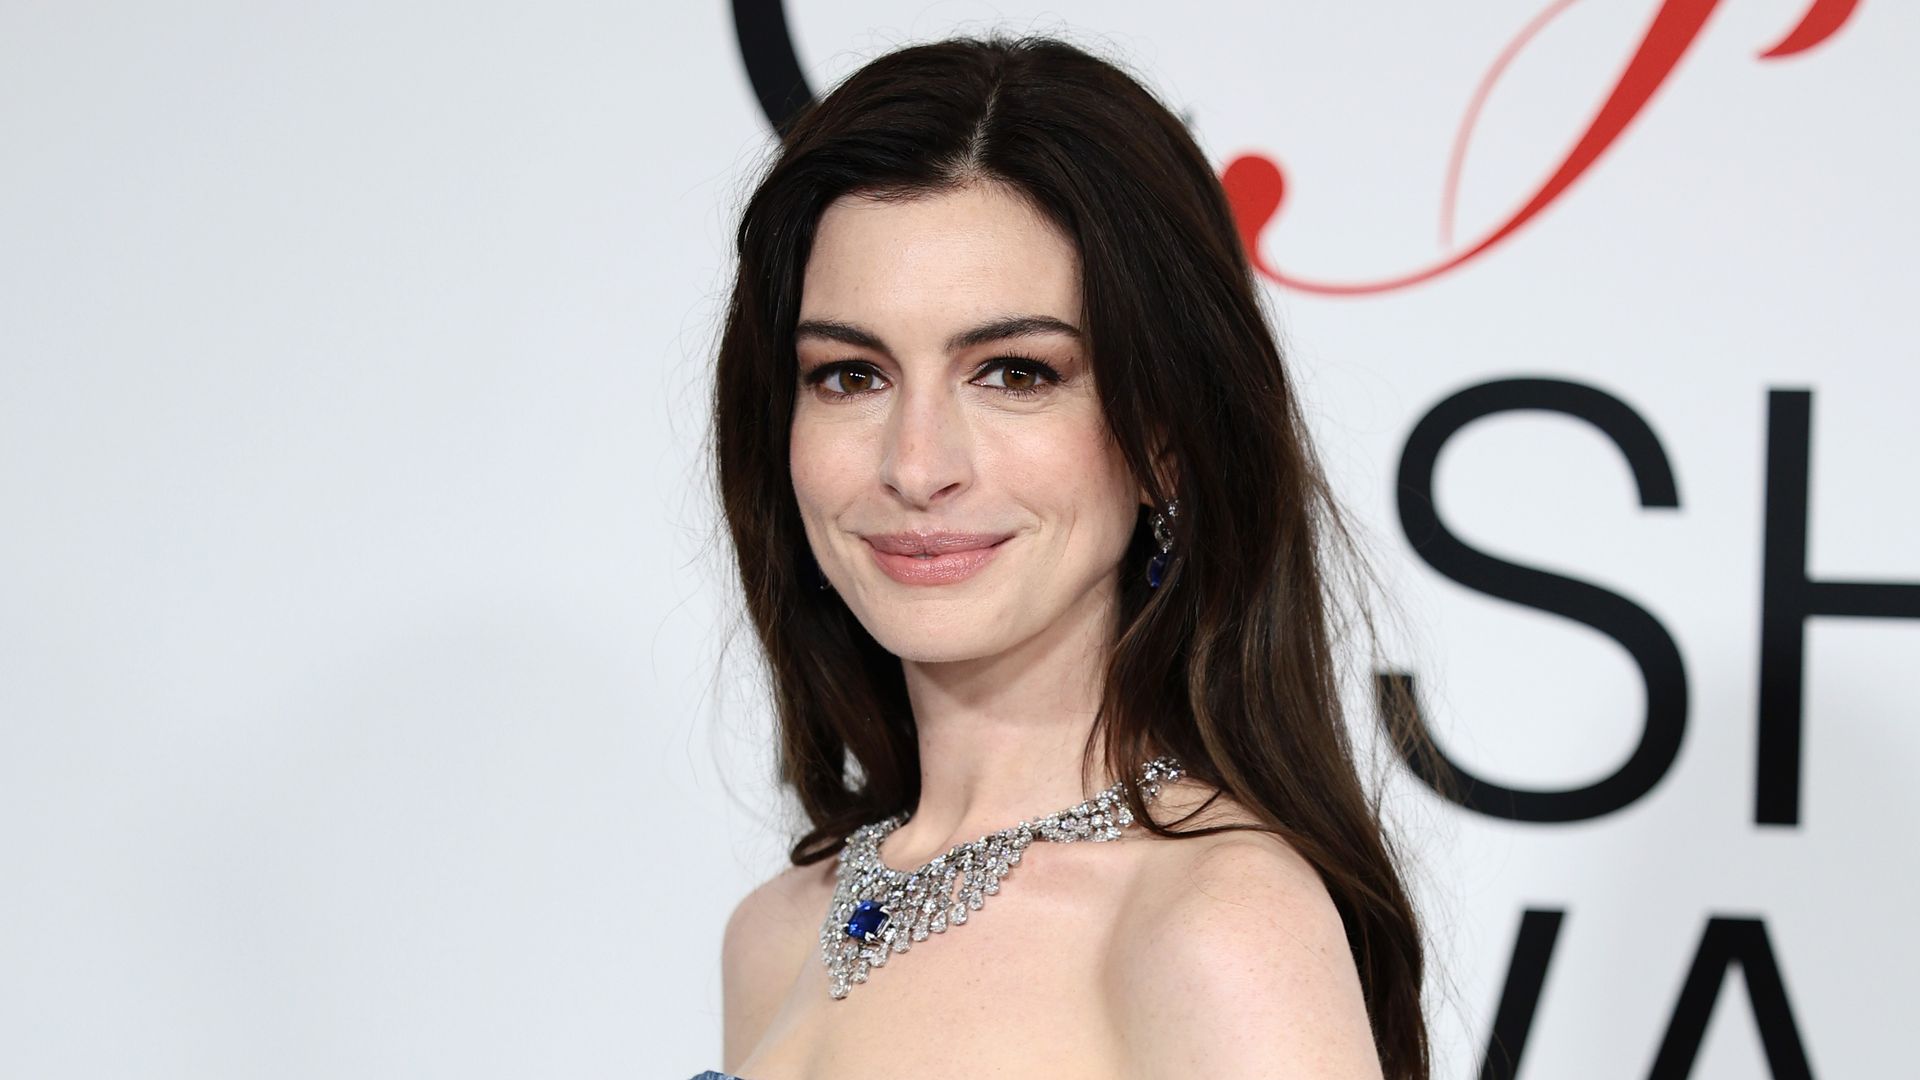 Anne Hathaway wearing double denim and a Bulgari necklace at the CFDA Awards 